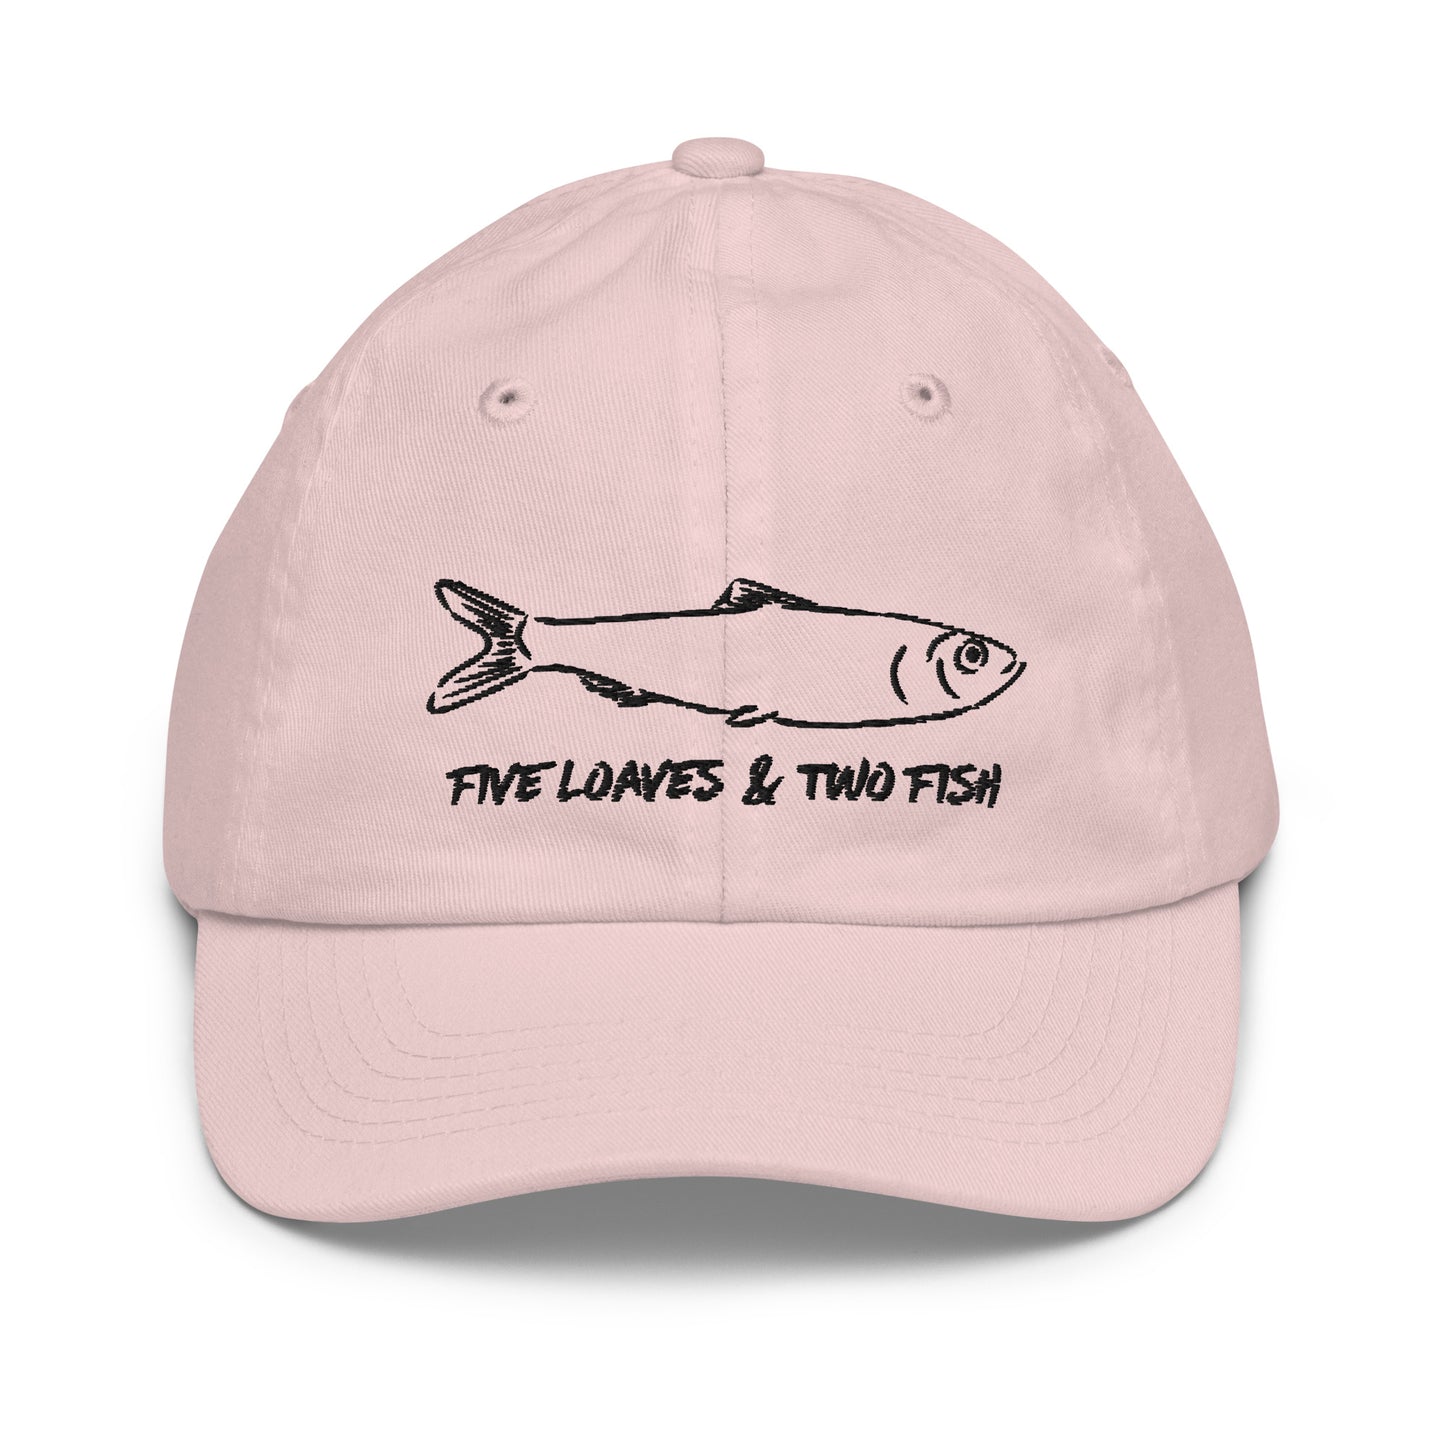 Five Loaves & Two Fish Youth Cap